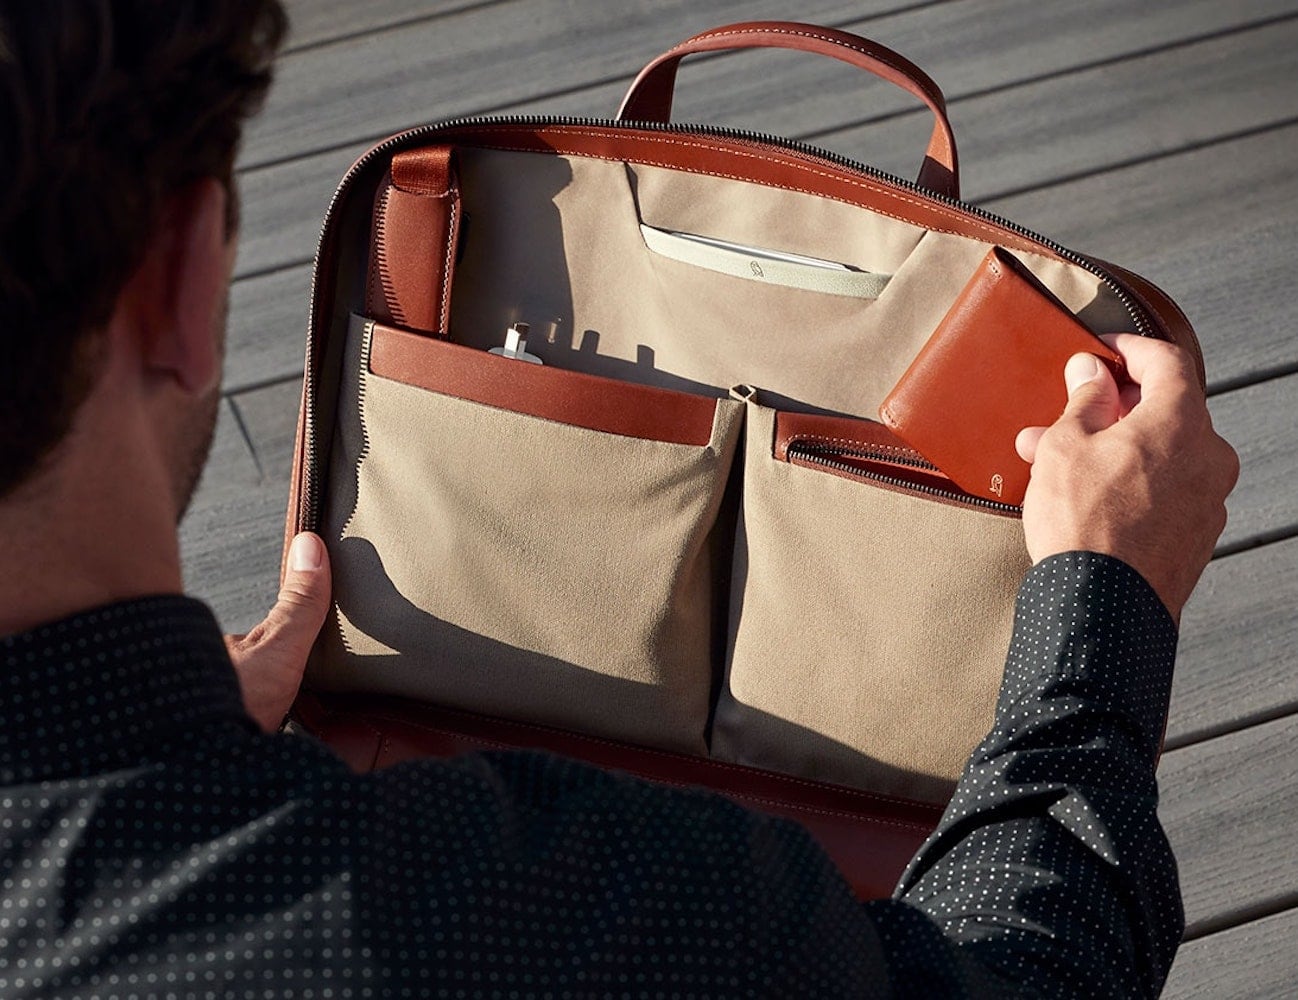 Bellroy Leather Laptop Brief makes you feel like a boss